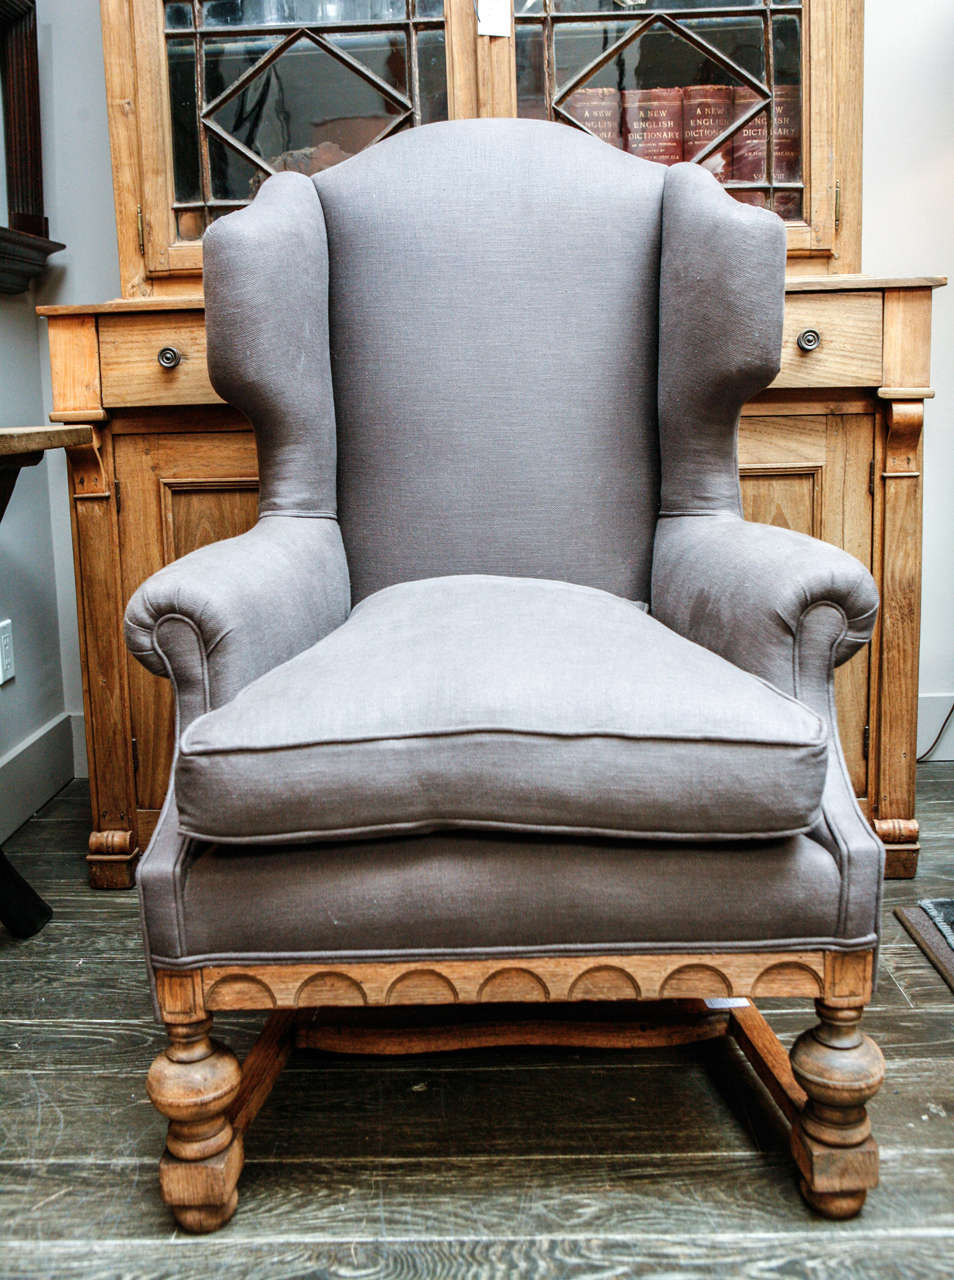 A linen upholstered deep winged chair with out-scrolled arm rests and a carved oak apron and bobbin leg stretcher base